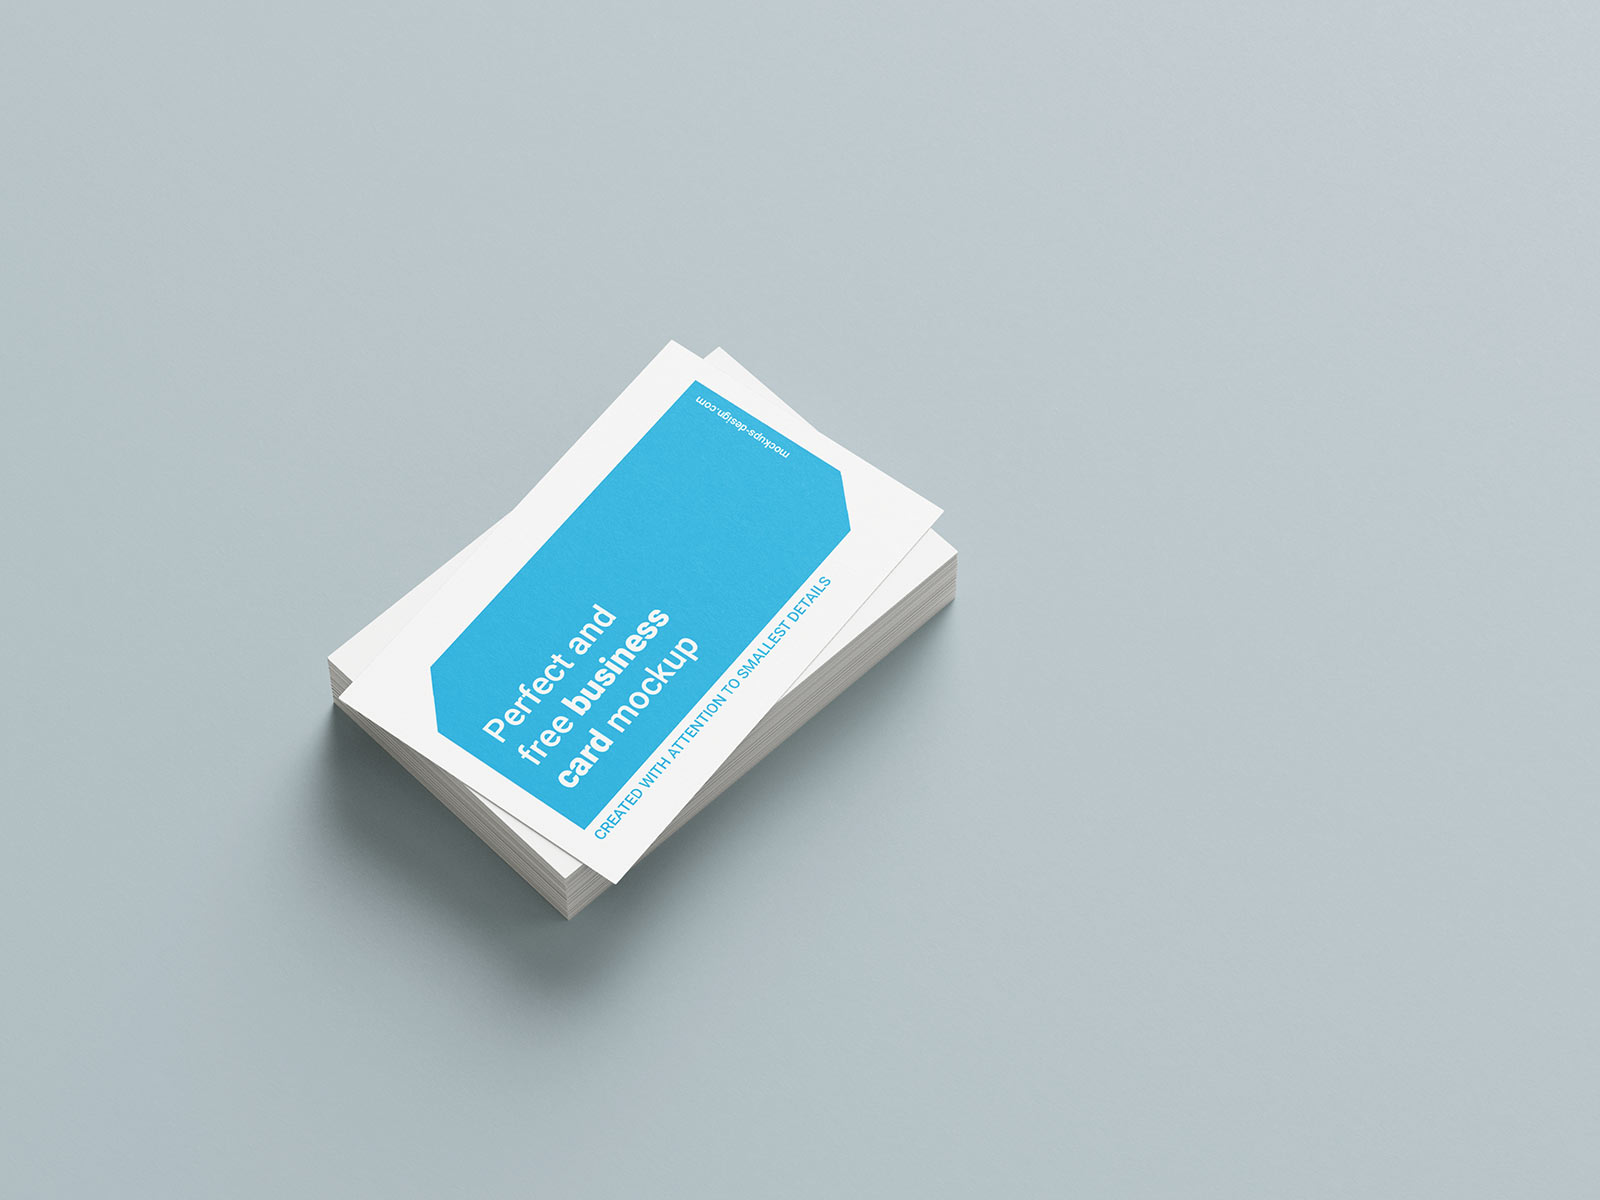 Stacked Business Cards Mockup PSD Set Free Download